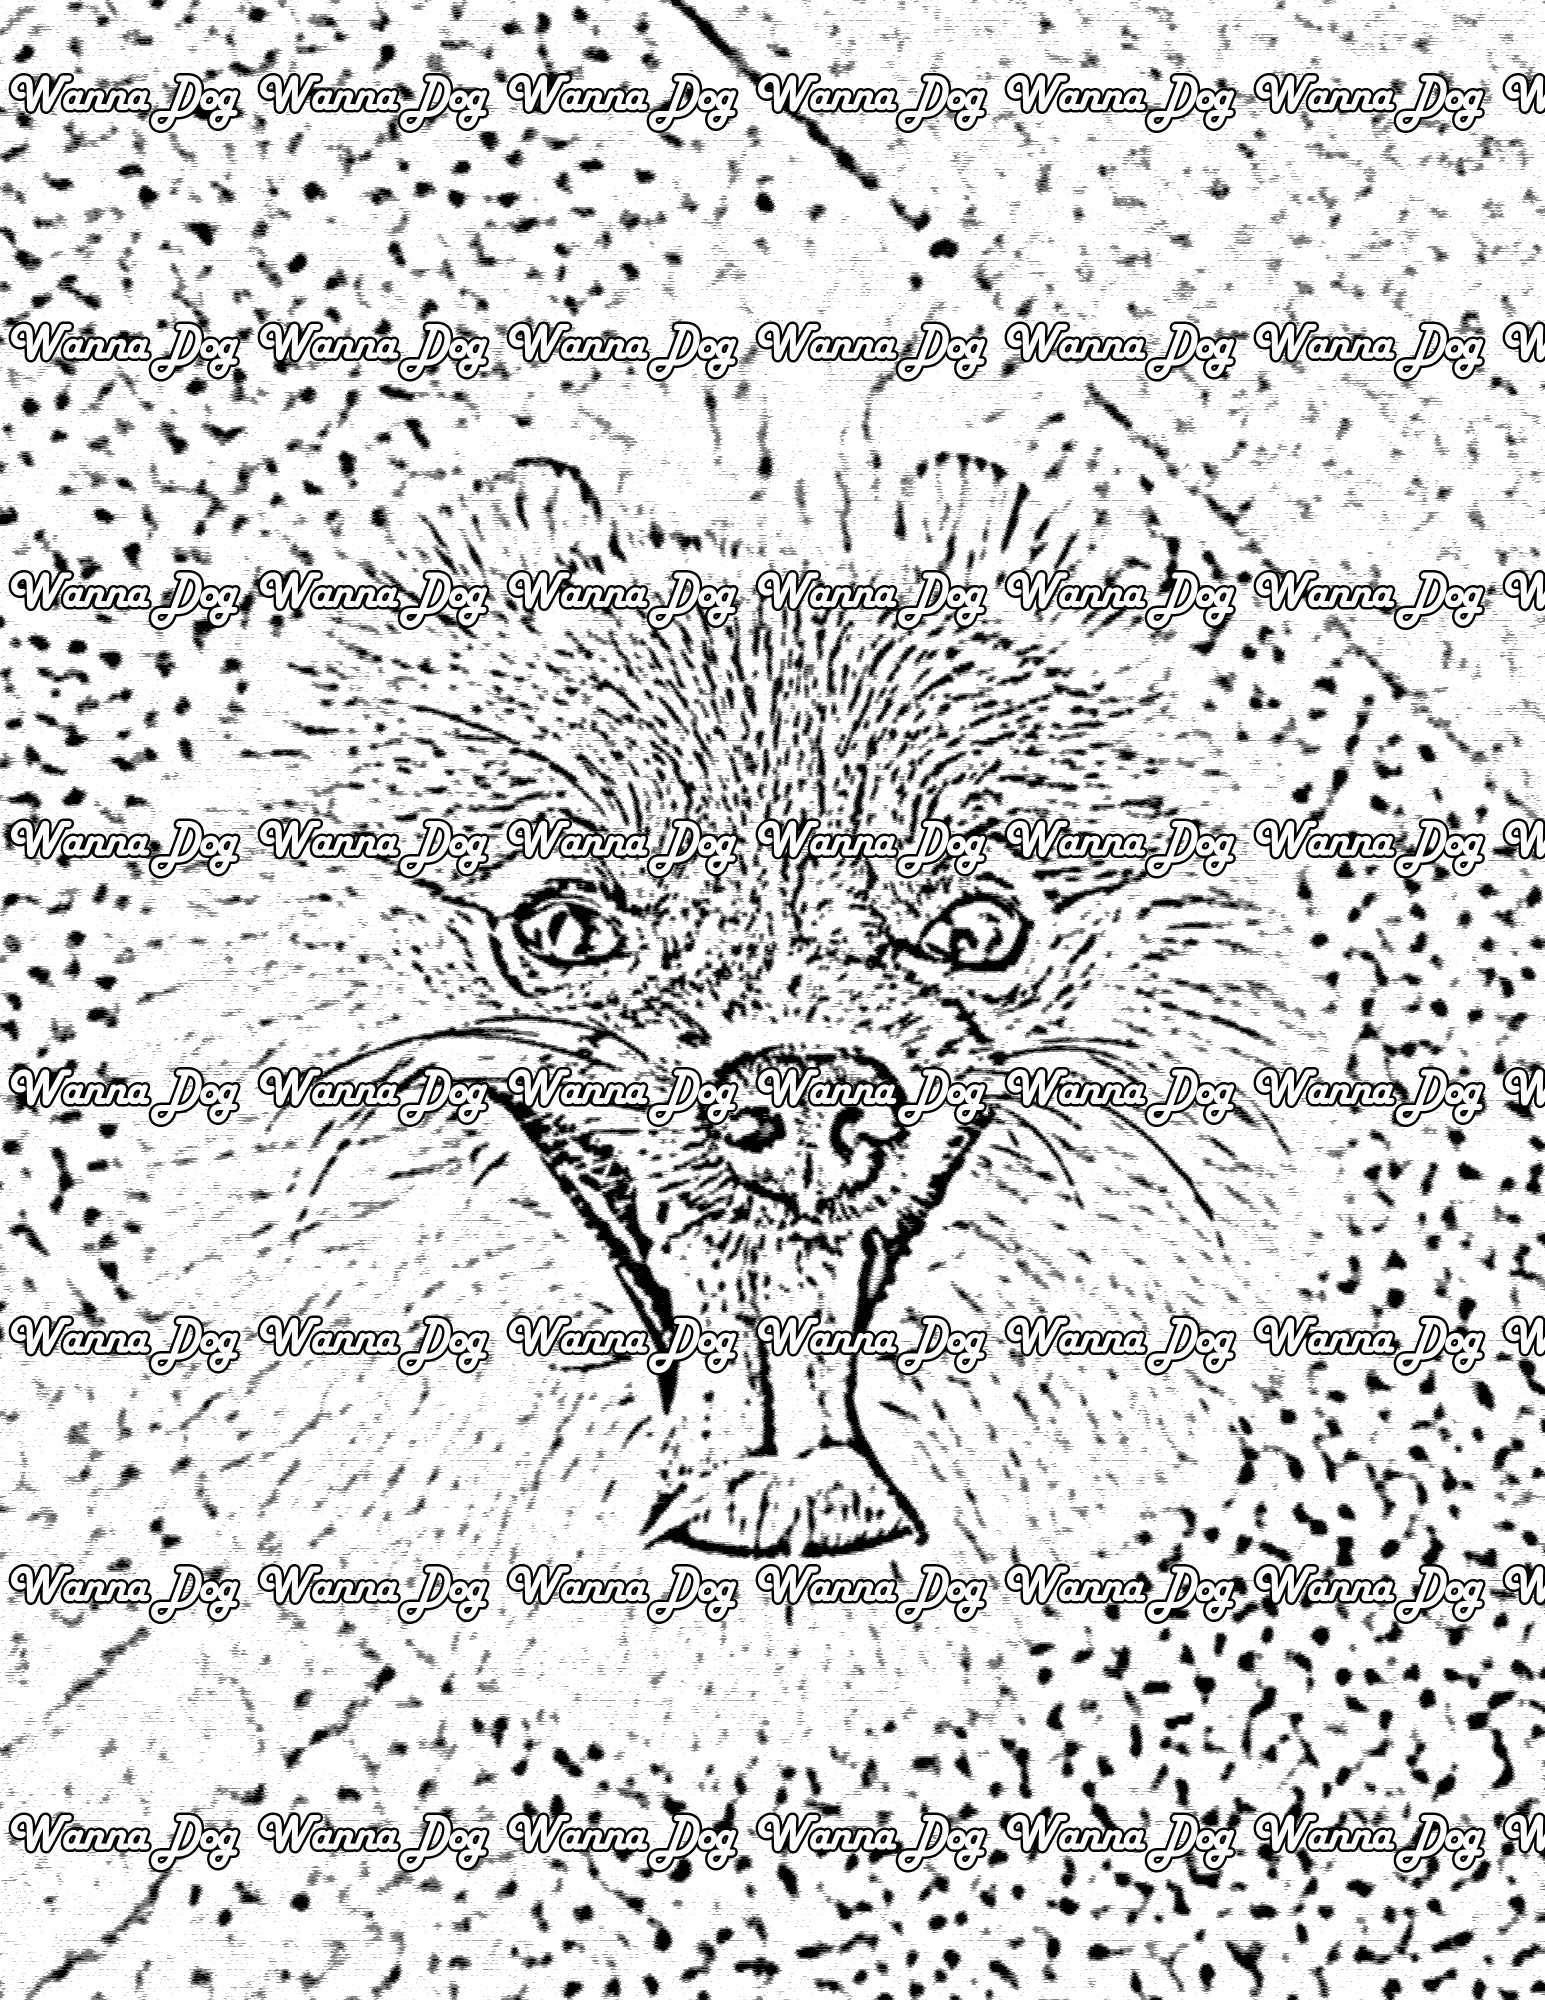 Pomeranian Coloring Page of a Pomeranian looking up with their tongue out